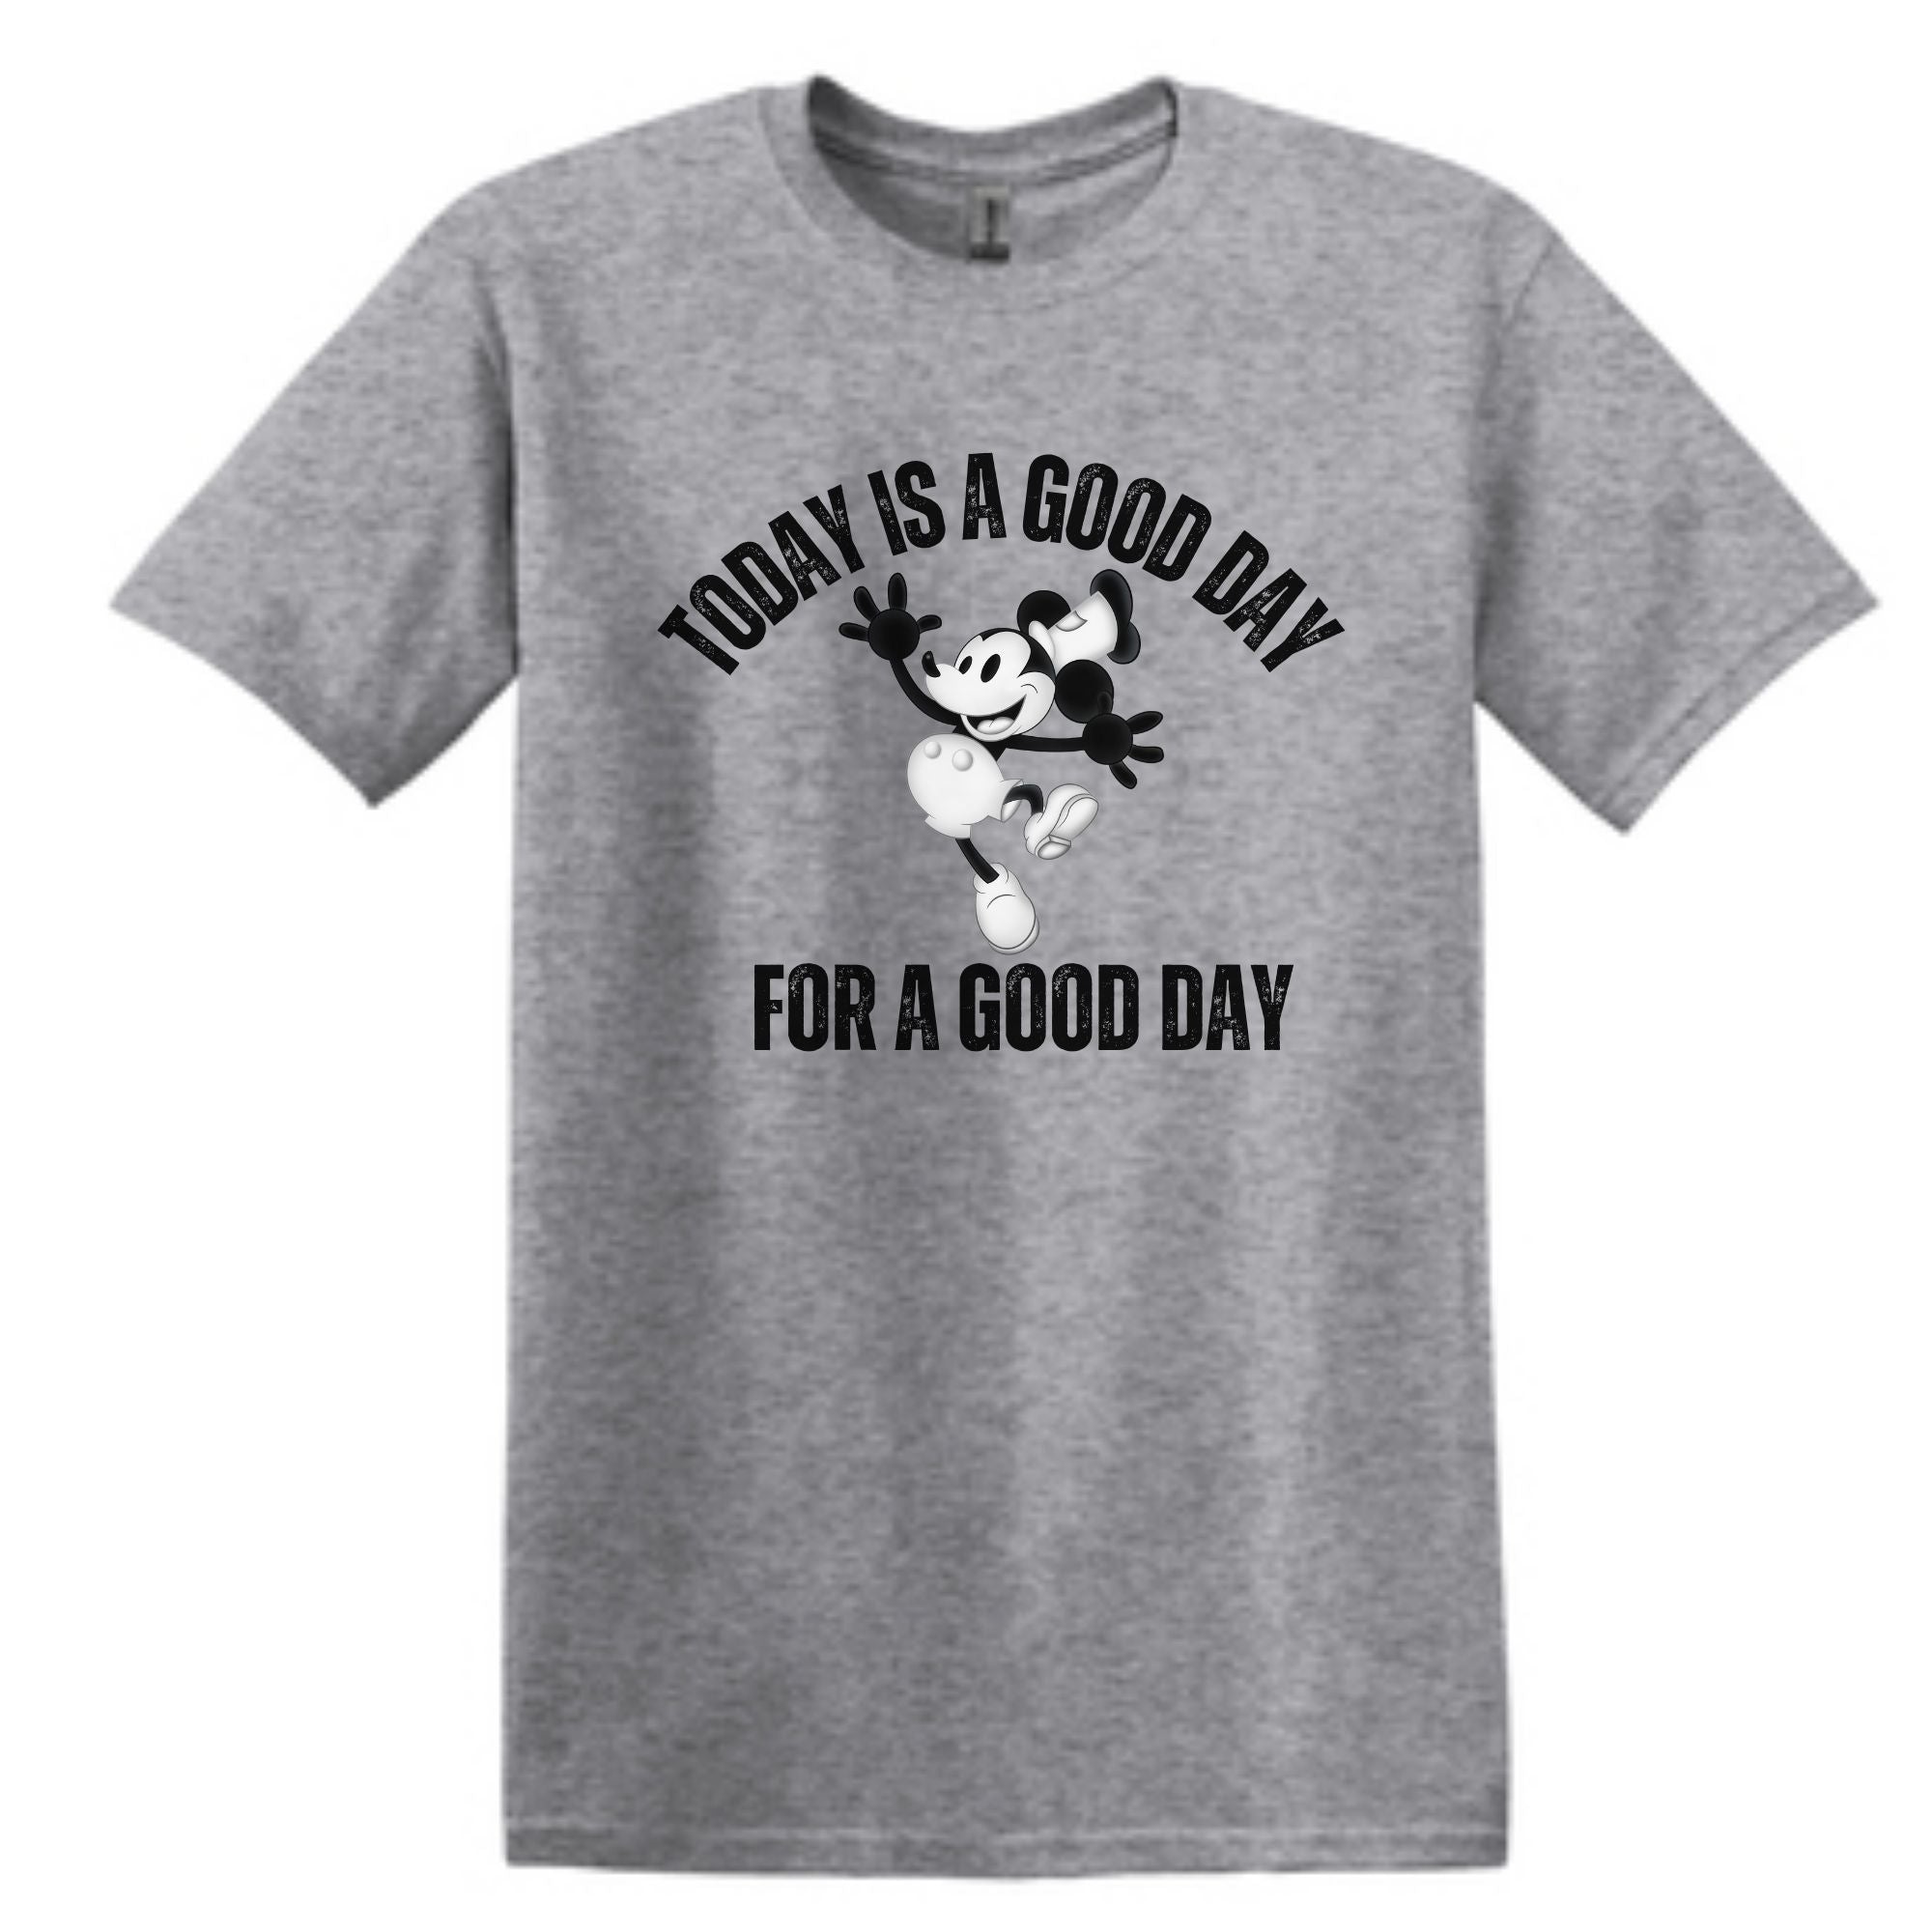 Steamboat willie, today is a good day for a good day grey cotton tee